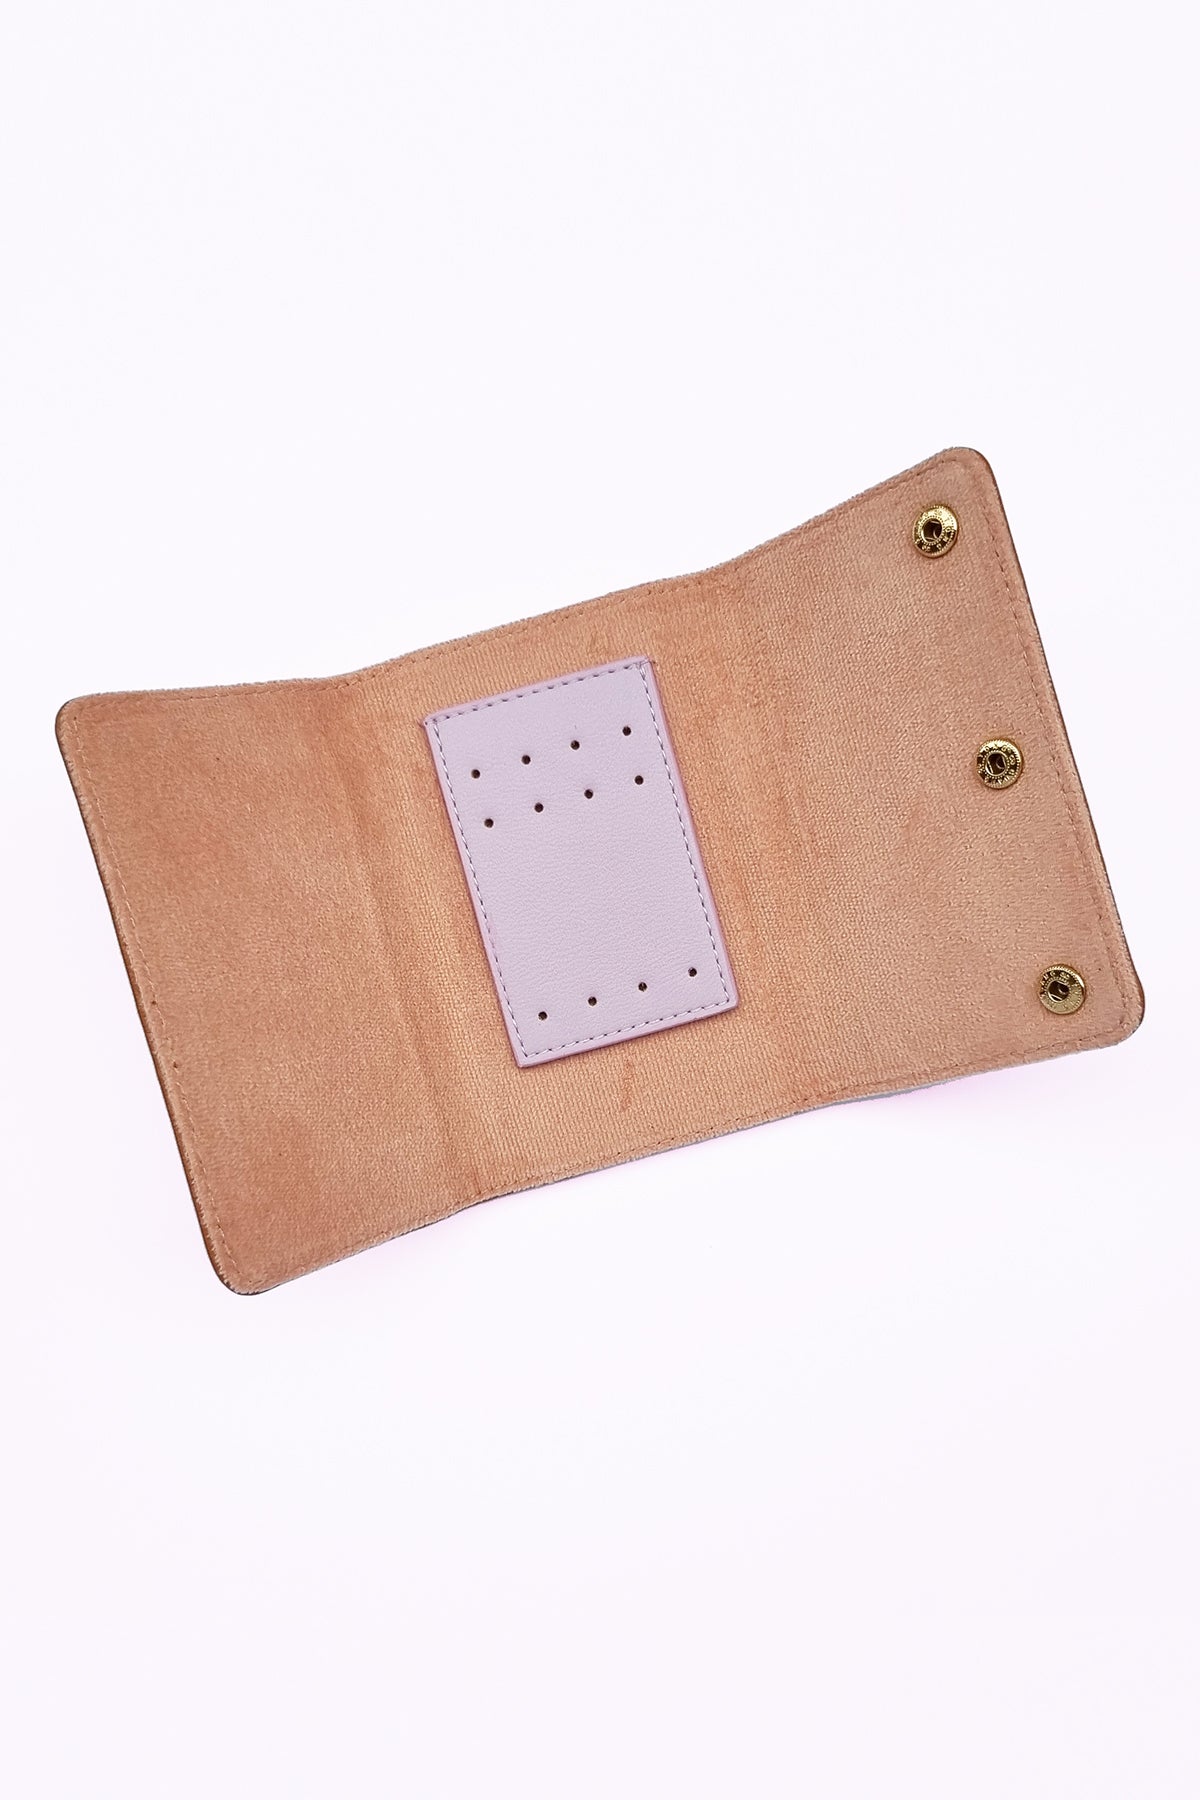 An open jewellery snug shows the inner features, a flocked pink fabric with a small rectangle of pu perforated with 8 holes up the top and four holes down the bottom. Three gold press stud buttons are shown down the right side of the snug.